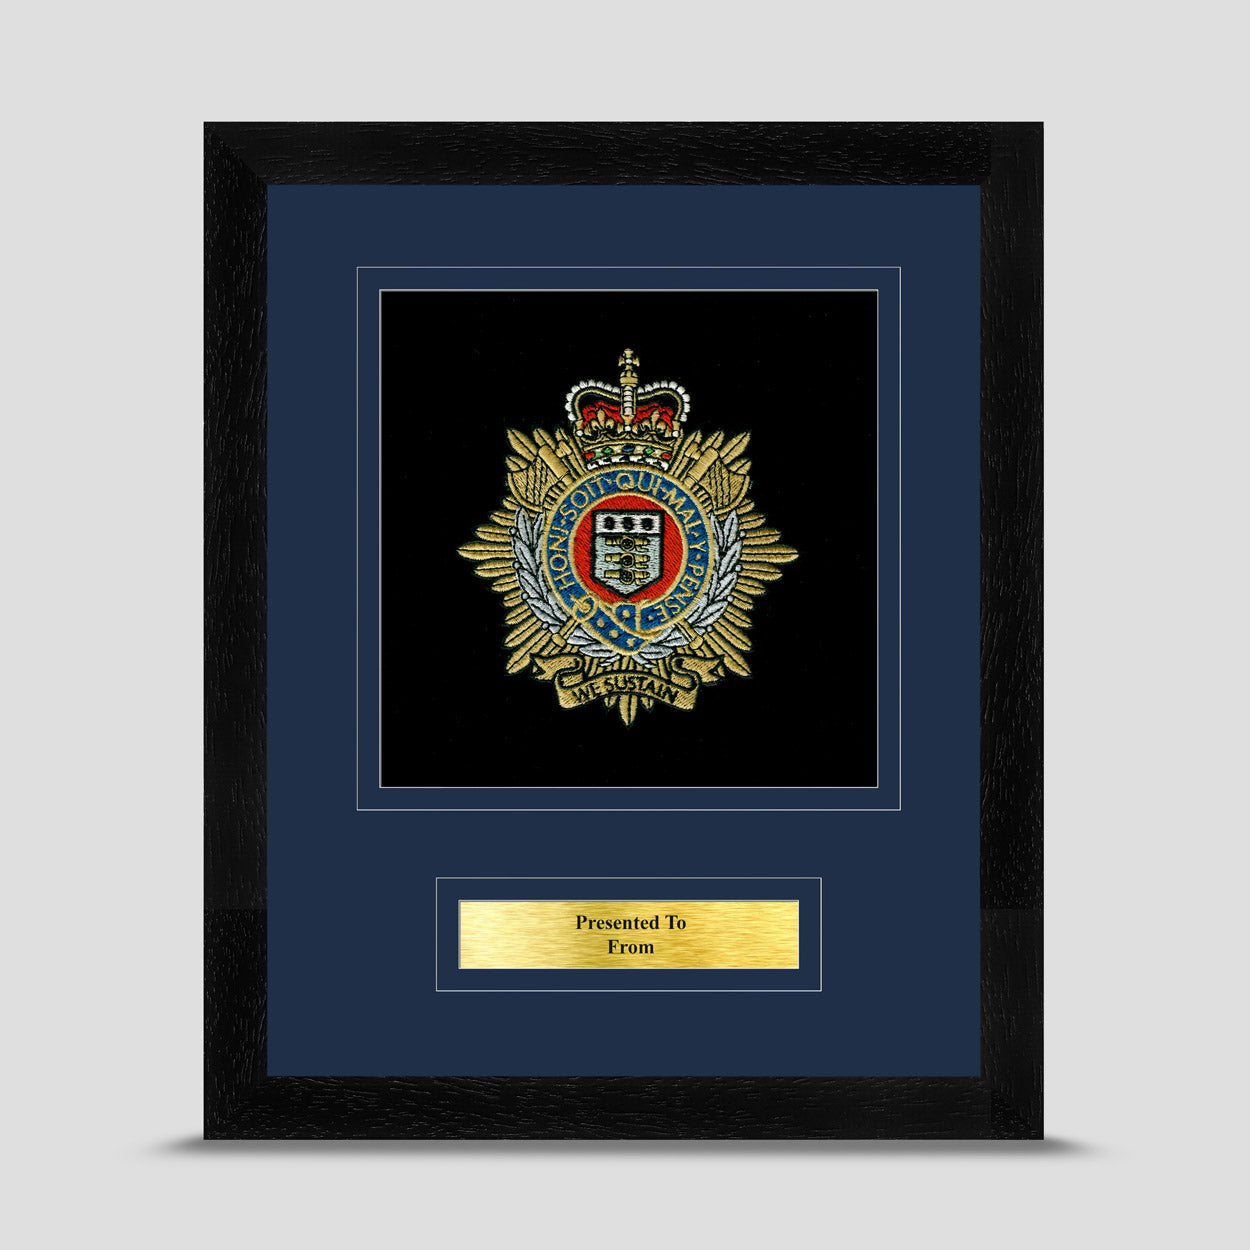 Royal Logistics Corps Framed Military Embroidery Presentation